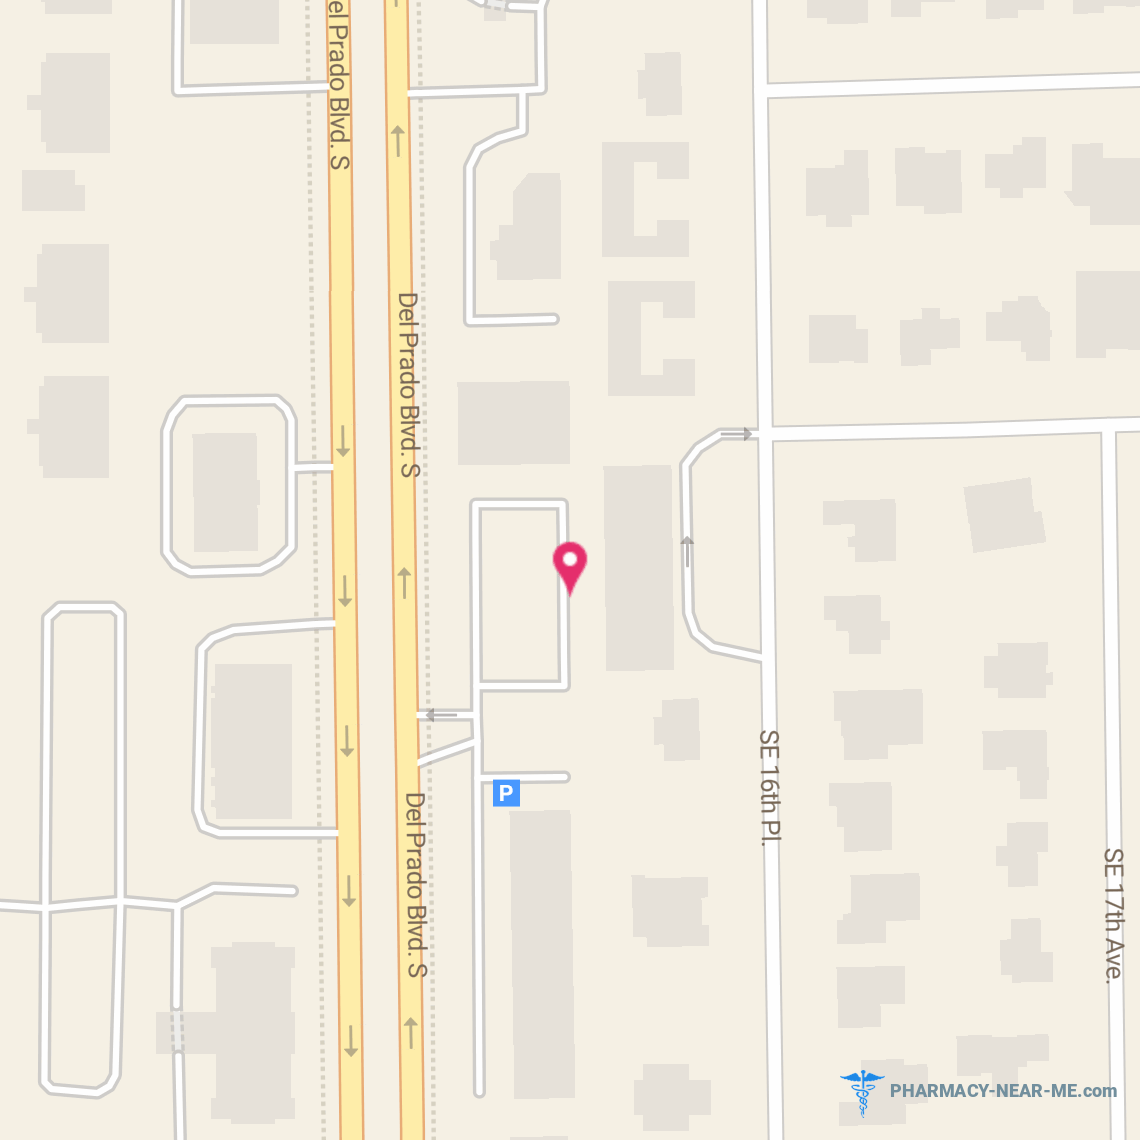 REMEDY PHARMACEUTICAL INC. - Pharmacy Hours, Phone, Reviews & Information: 231 Del Prado Boulevard South, Cape Coral, Florida 33990, United States